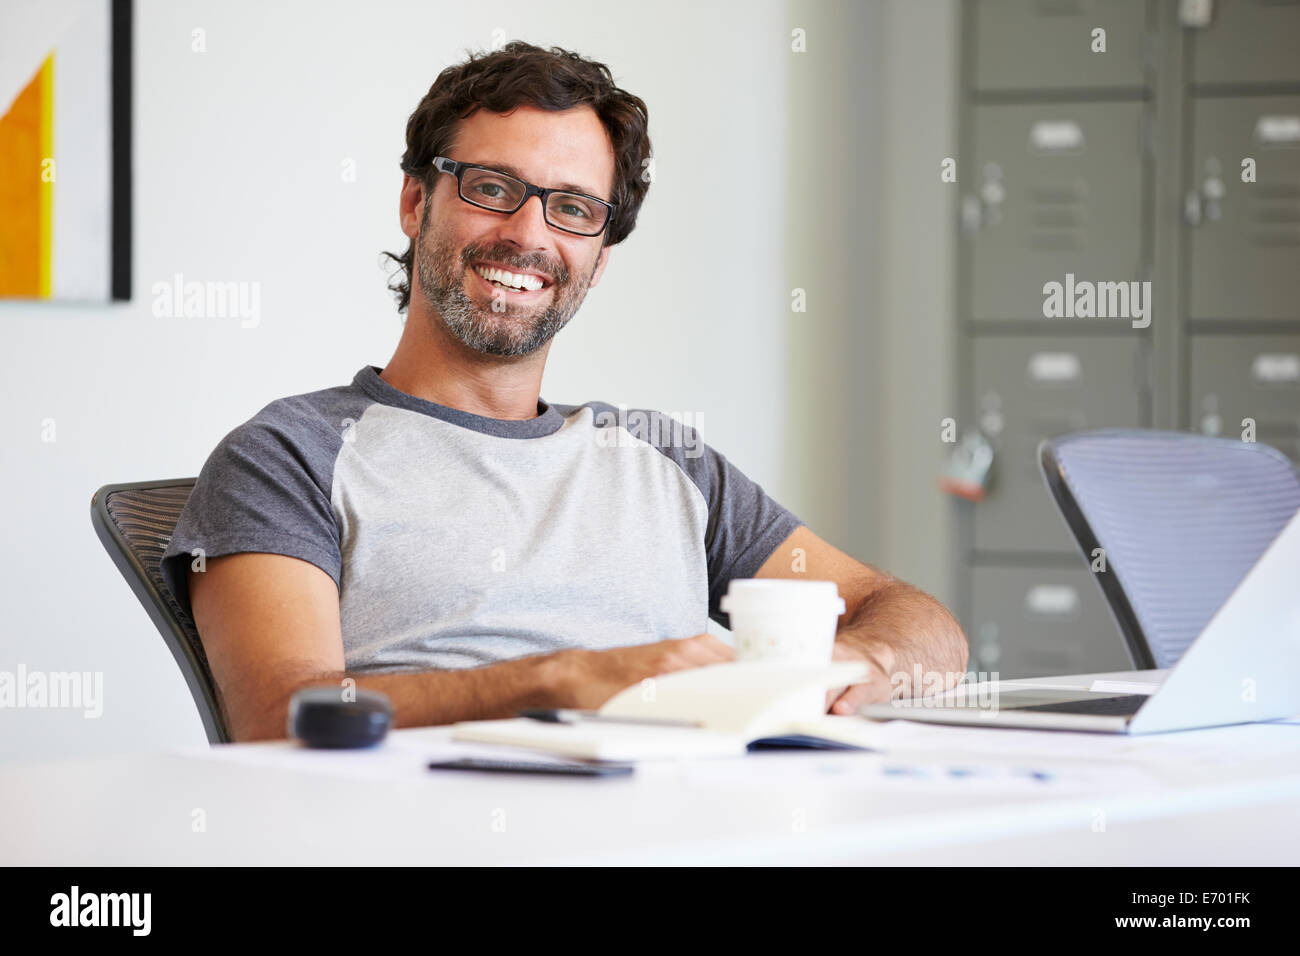 Portrait Of Casually Dressed Man Working In Design Studio Stock Photo